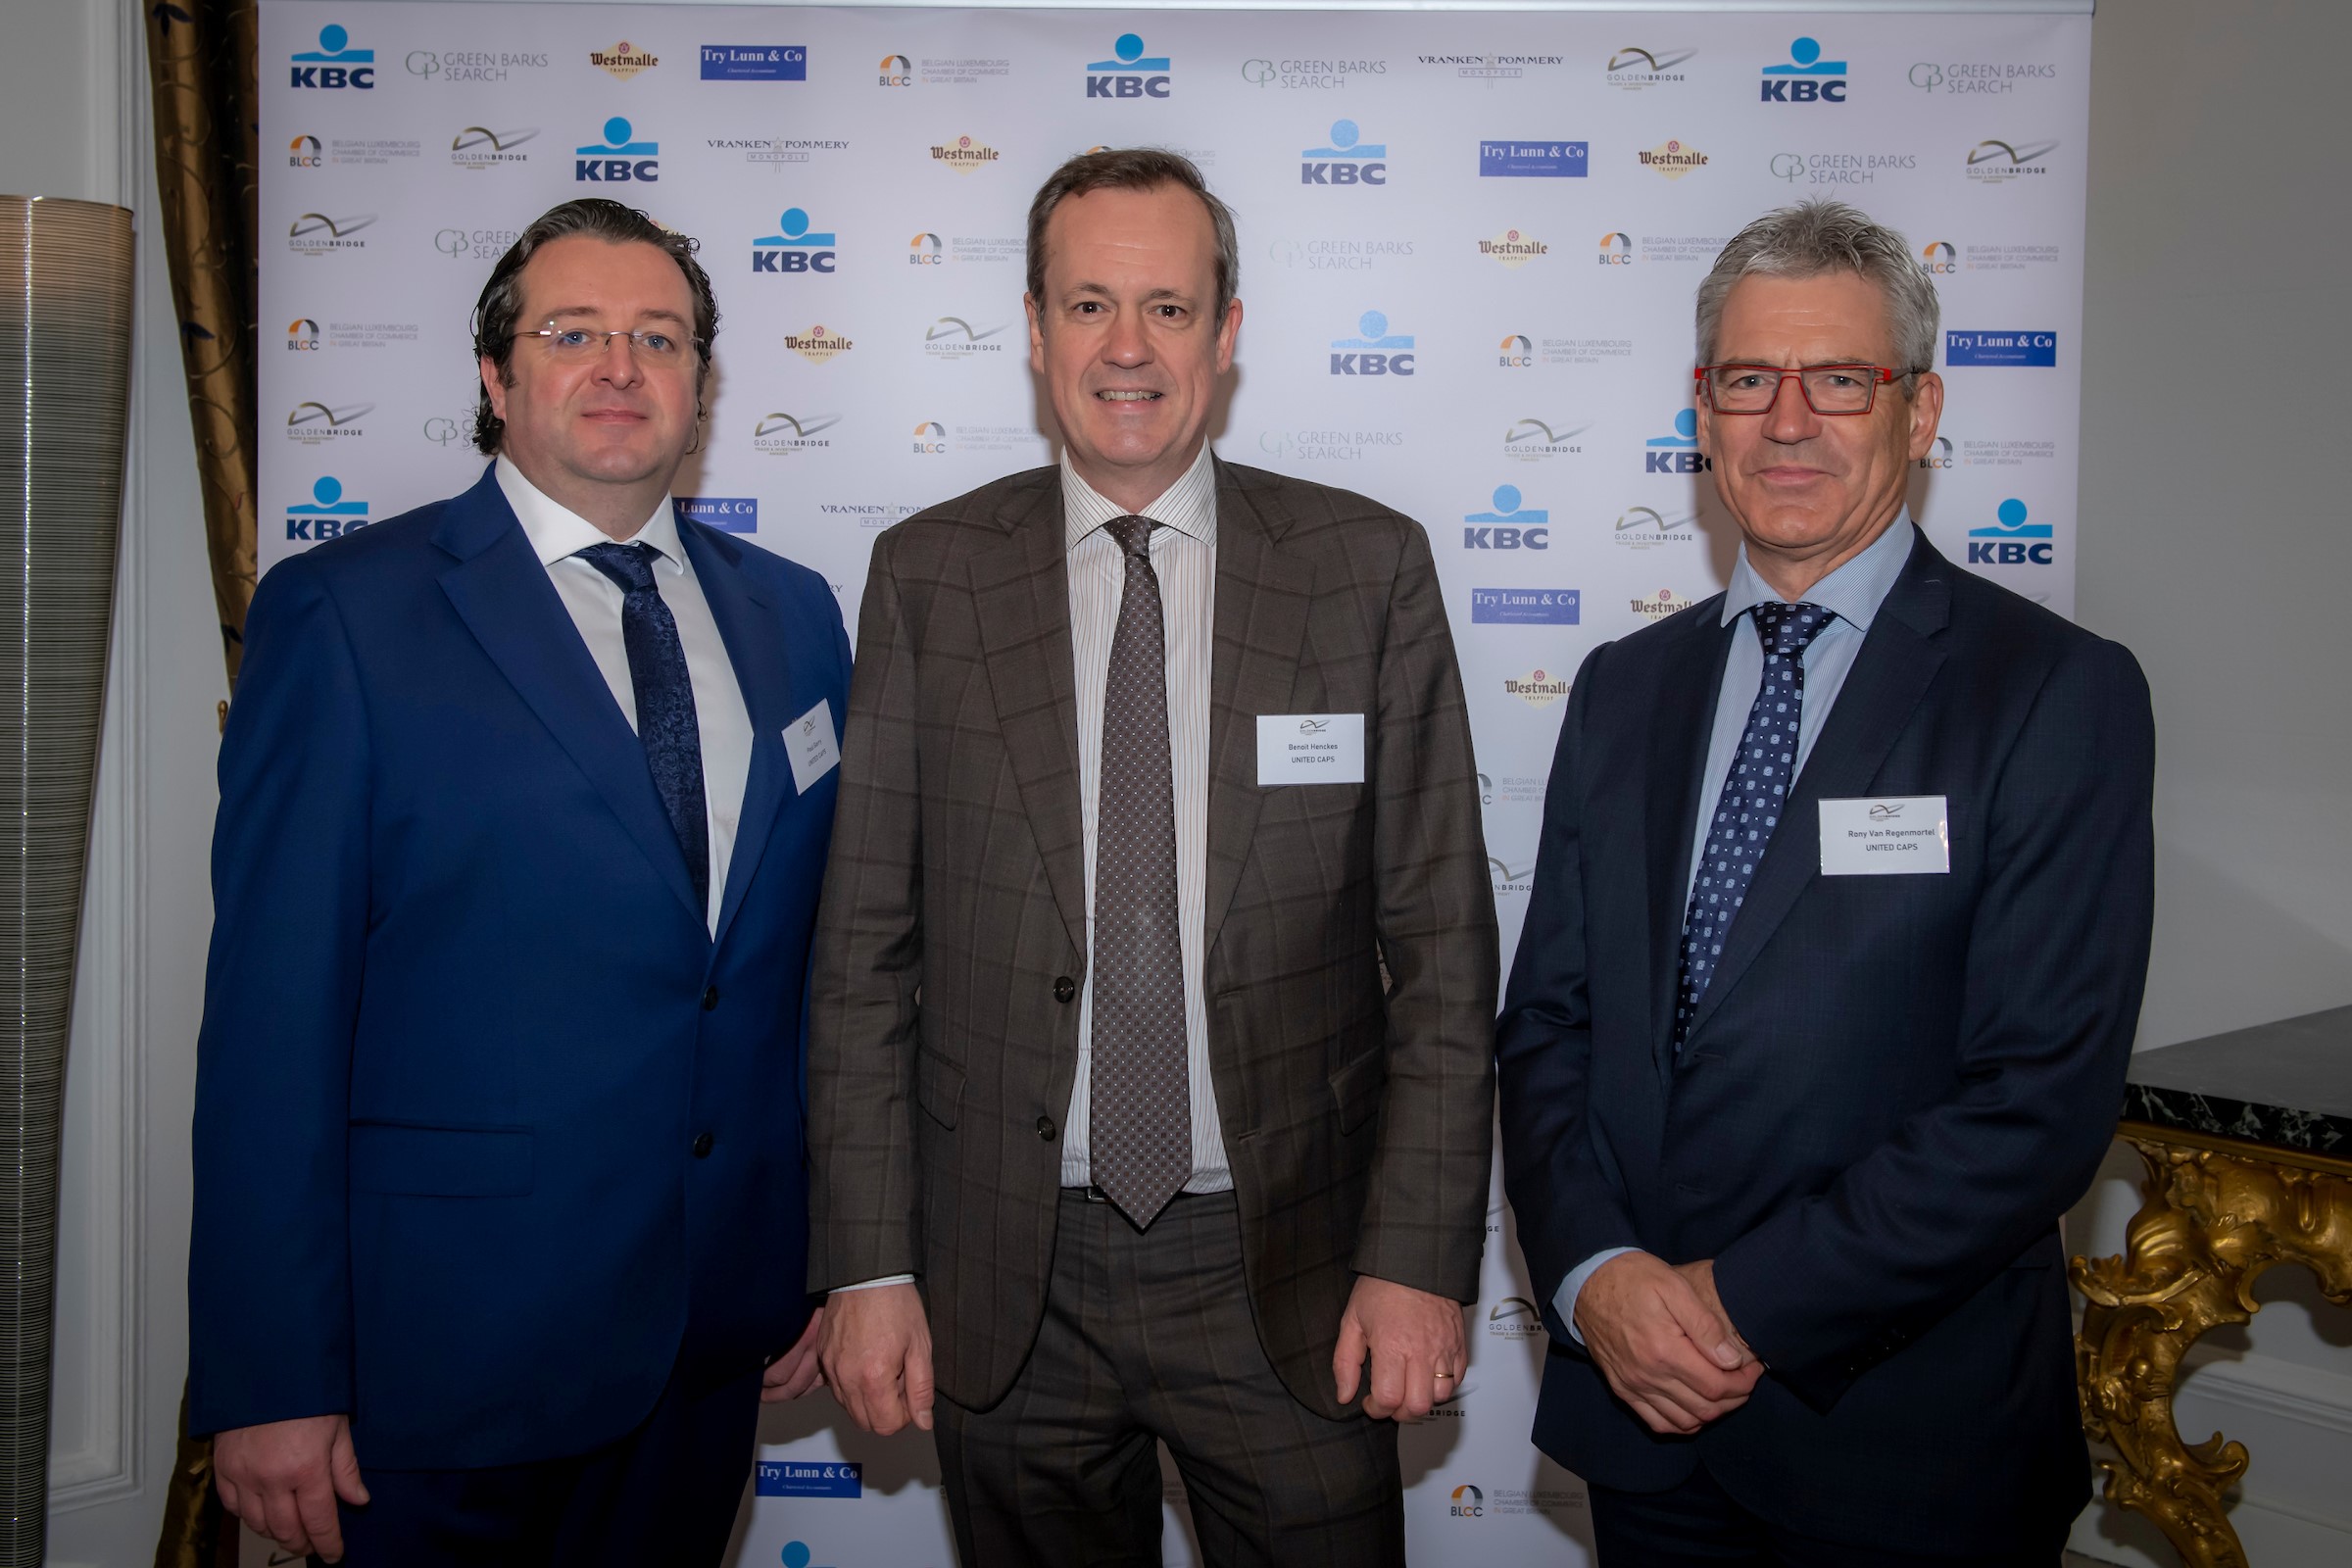 UNITED CAPS CEO Benoit Henckes (middle), Paul Gorry, Plant Director UK & Ireland (left), Rony Van Regenmortel, Chief Projects Officer (right) received the prestigious BLCC Golden Bridge Awards at the 22nd edition of this award presentation.